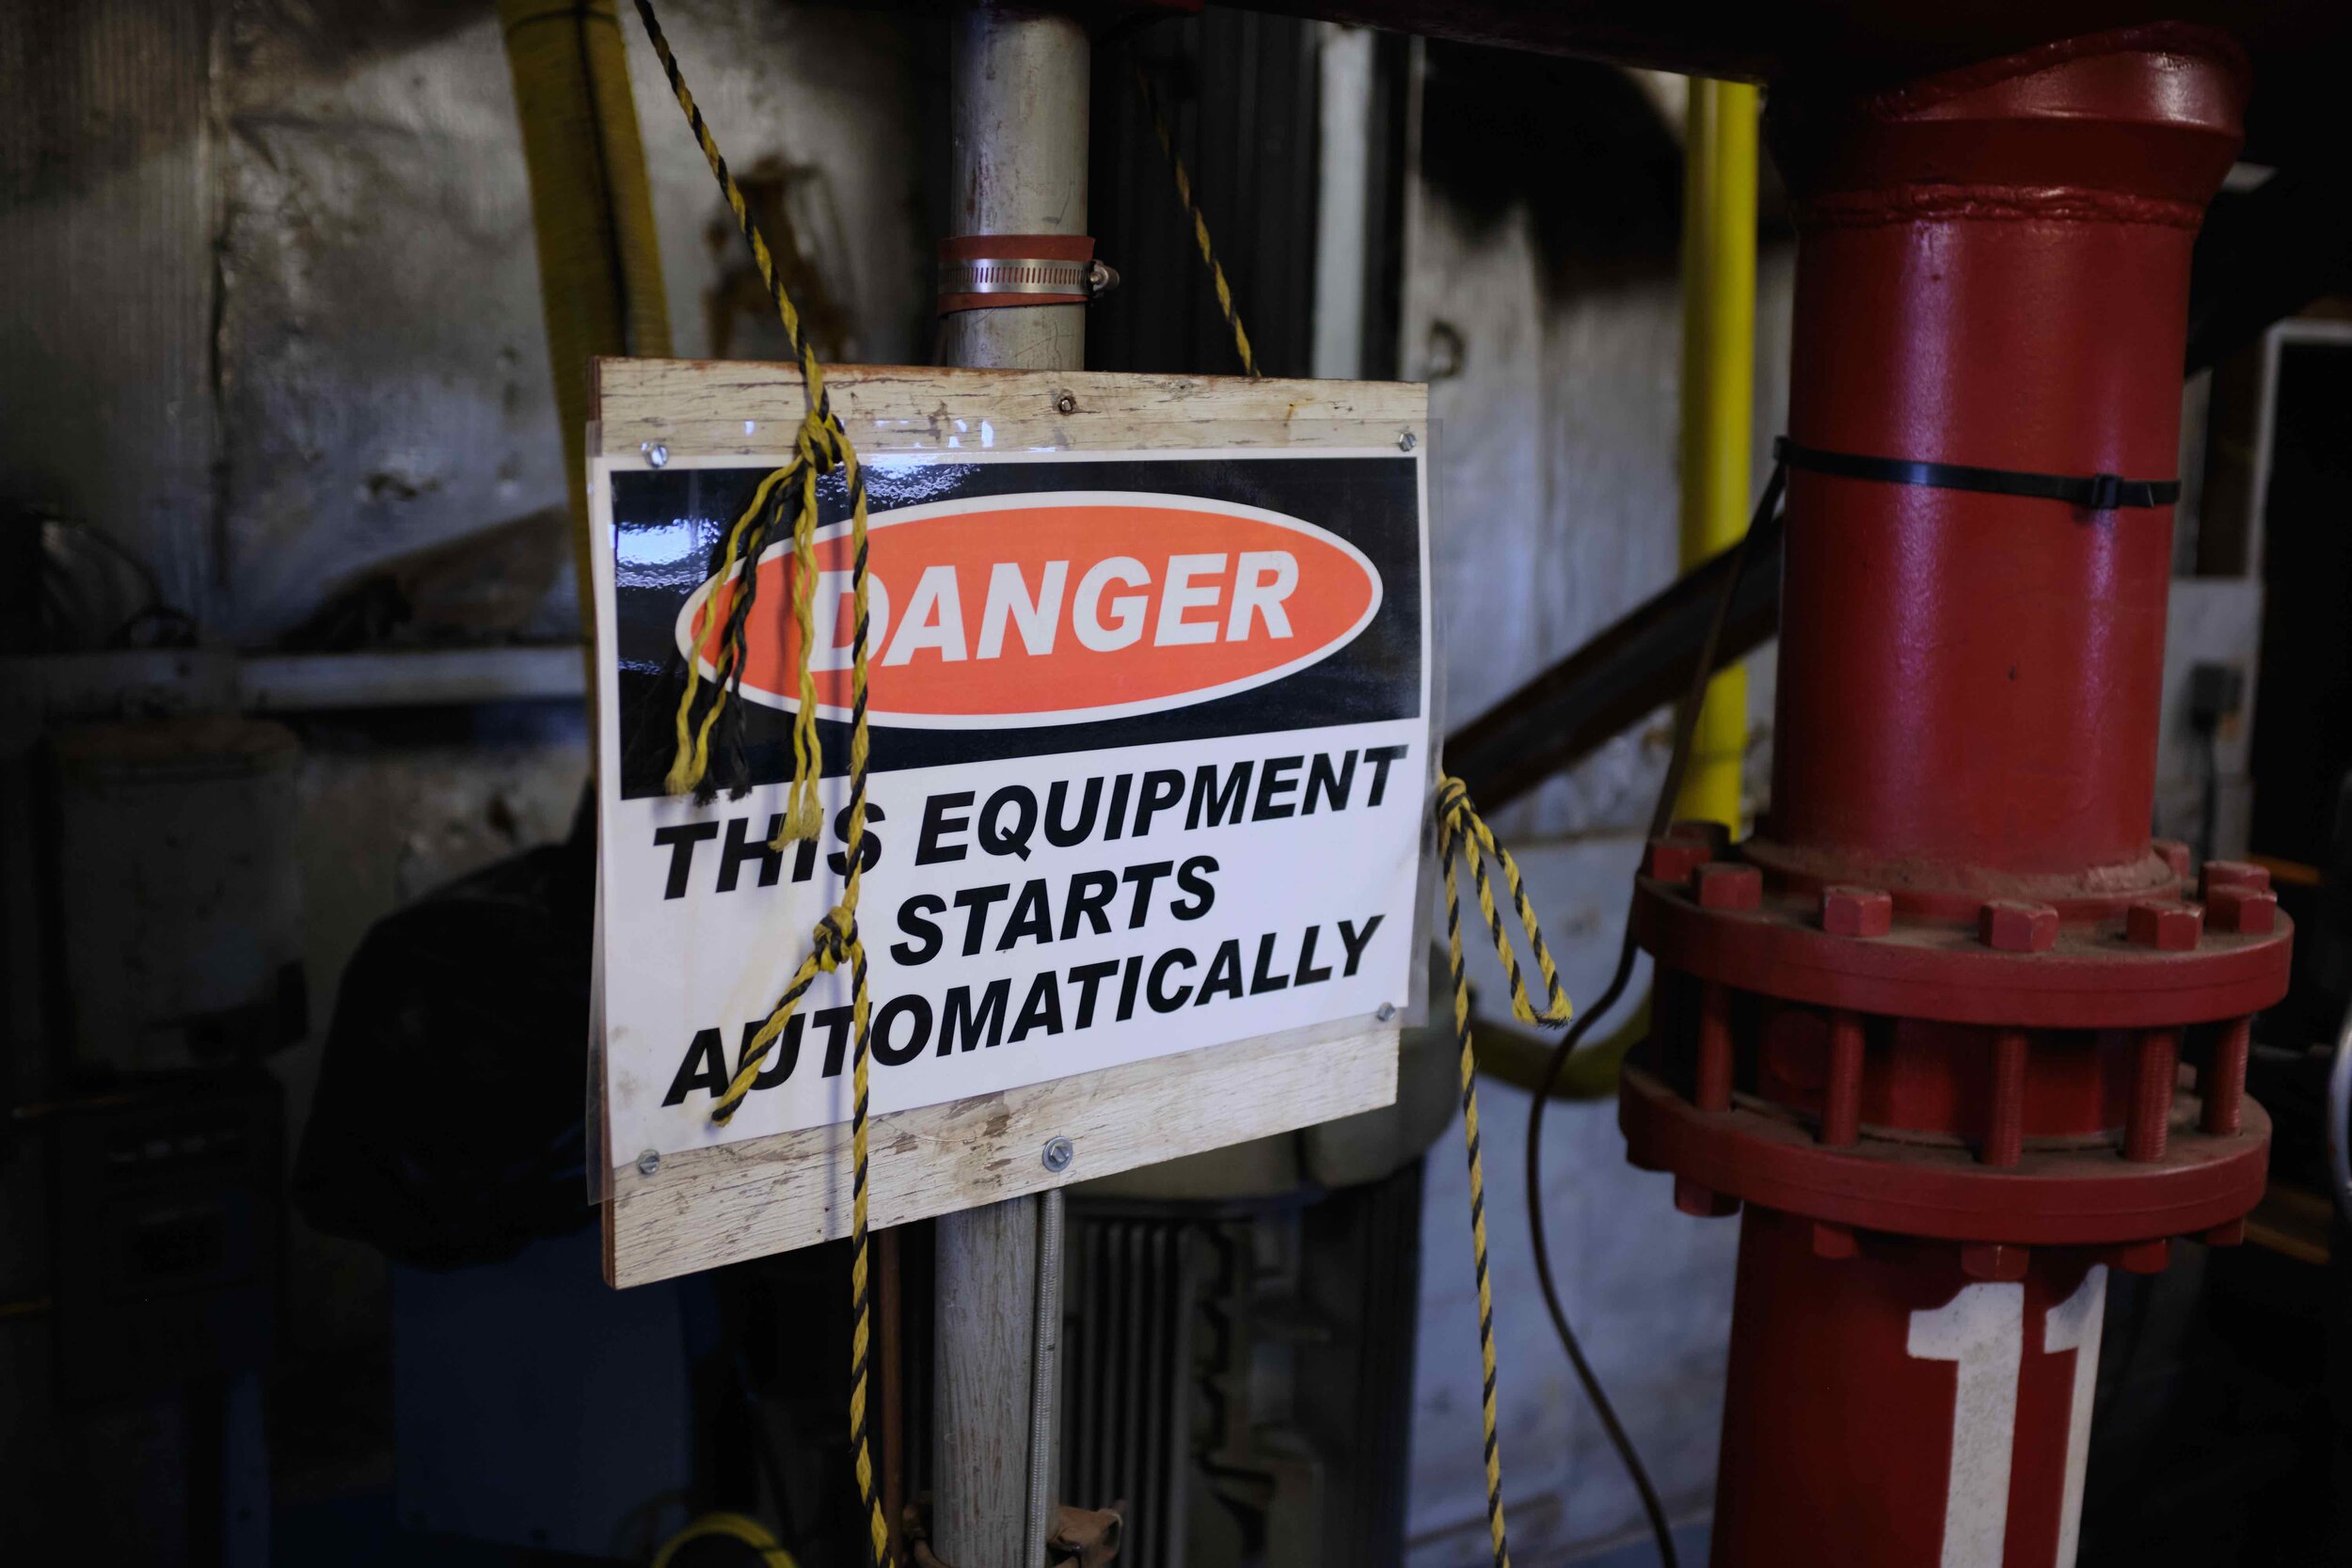  The volume of the noise in the pump house is such that conversations are nearly impossible even at a shout. Machinery activates and shuts down via control mechanisms outside the room, and the fright of a pump activating without warning is an experie